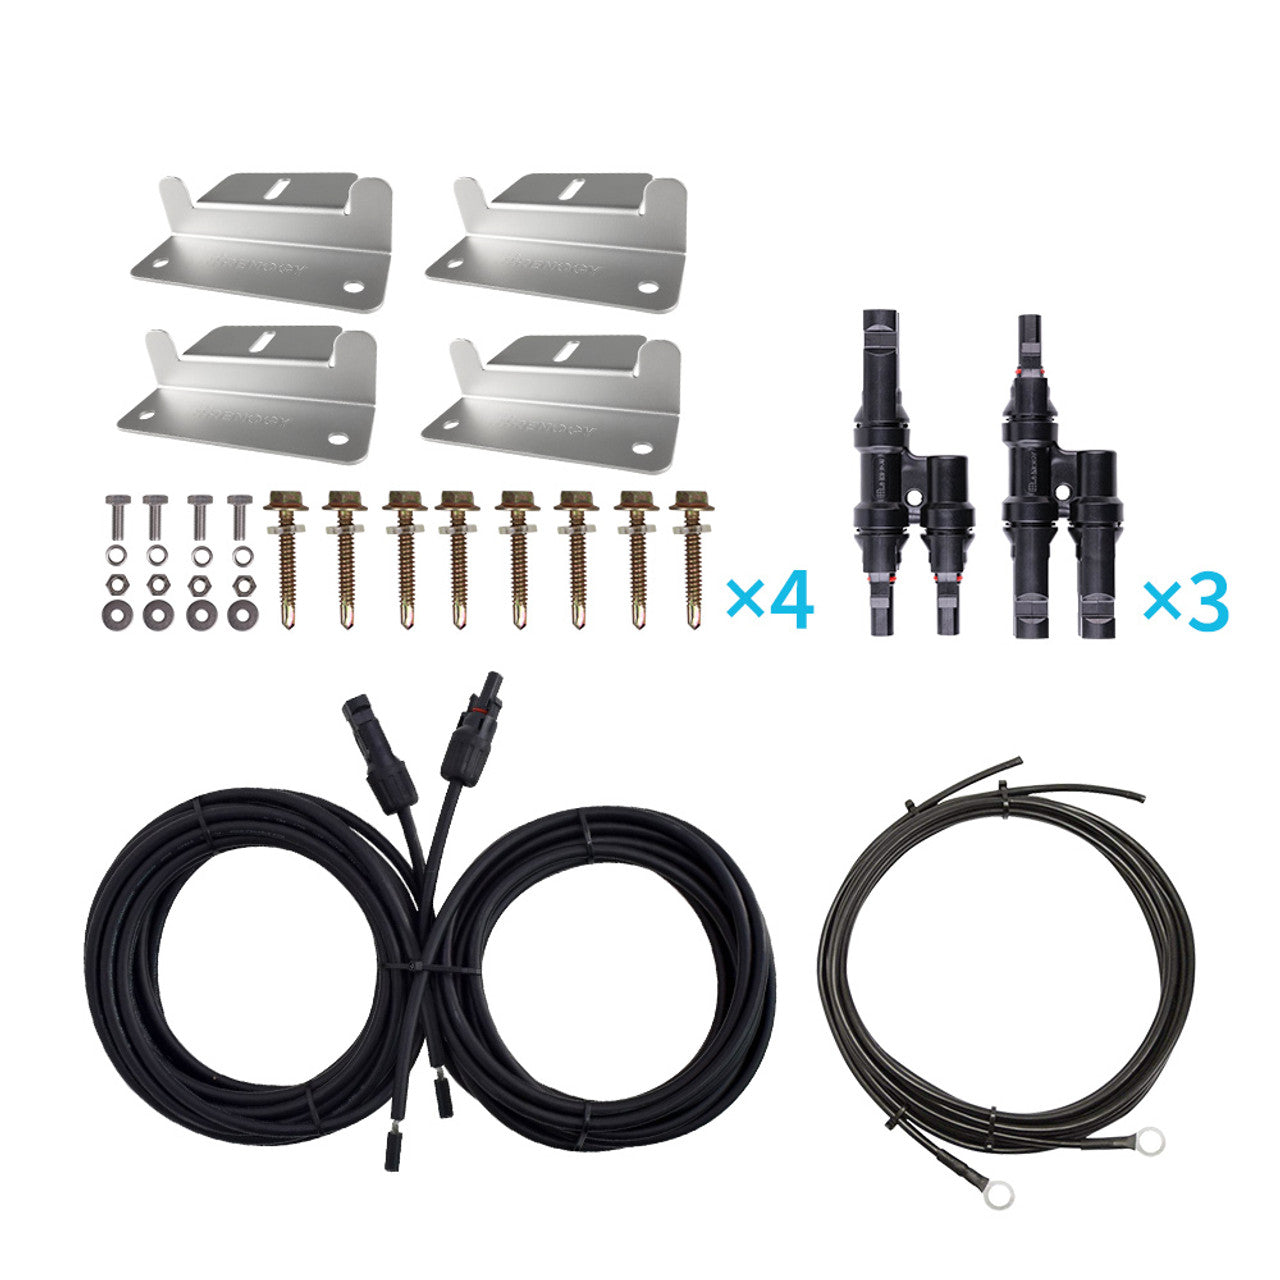 Renogy Accessories and Cables Kit for 100/200/400 W module RNG-MTS-ZB x4